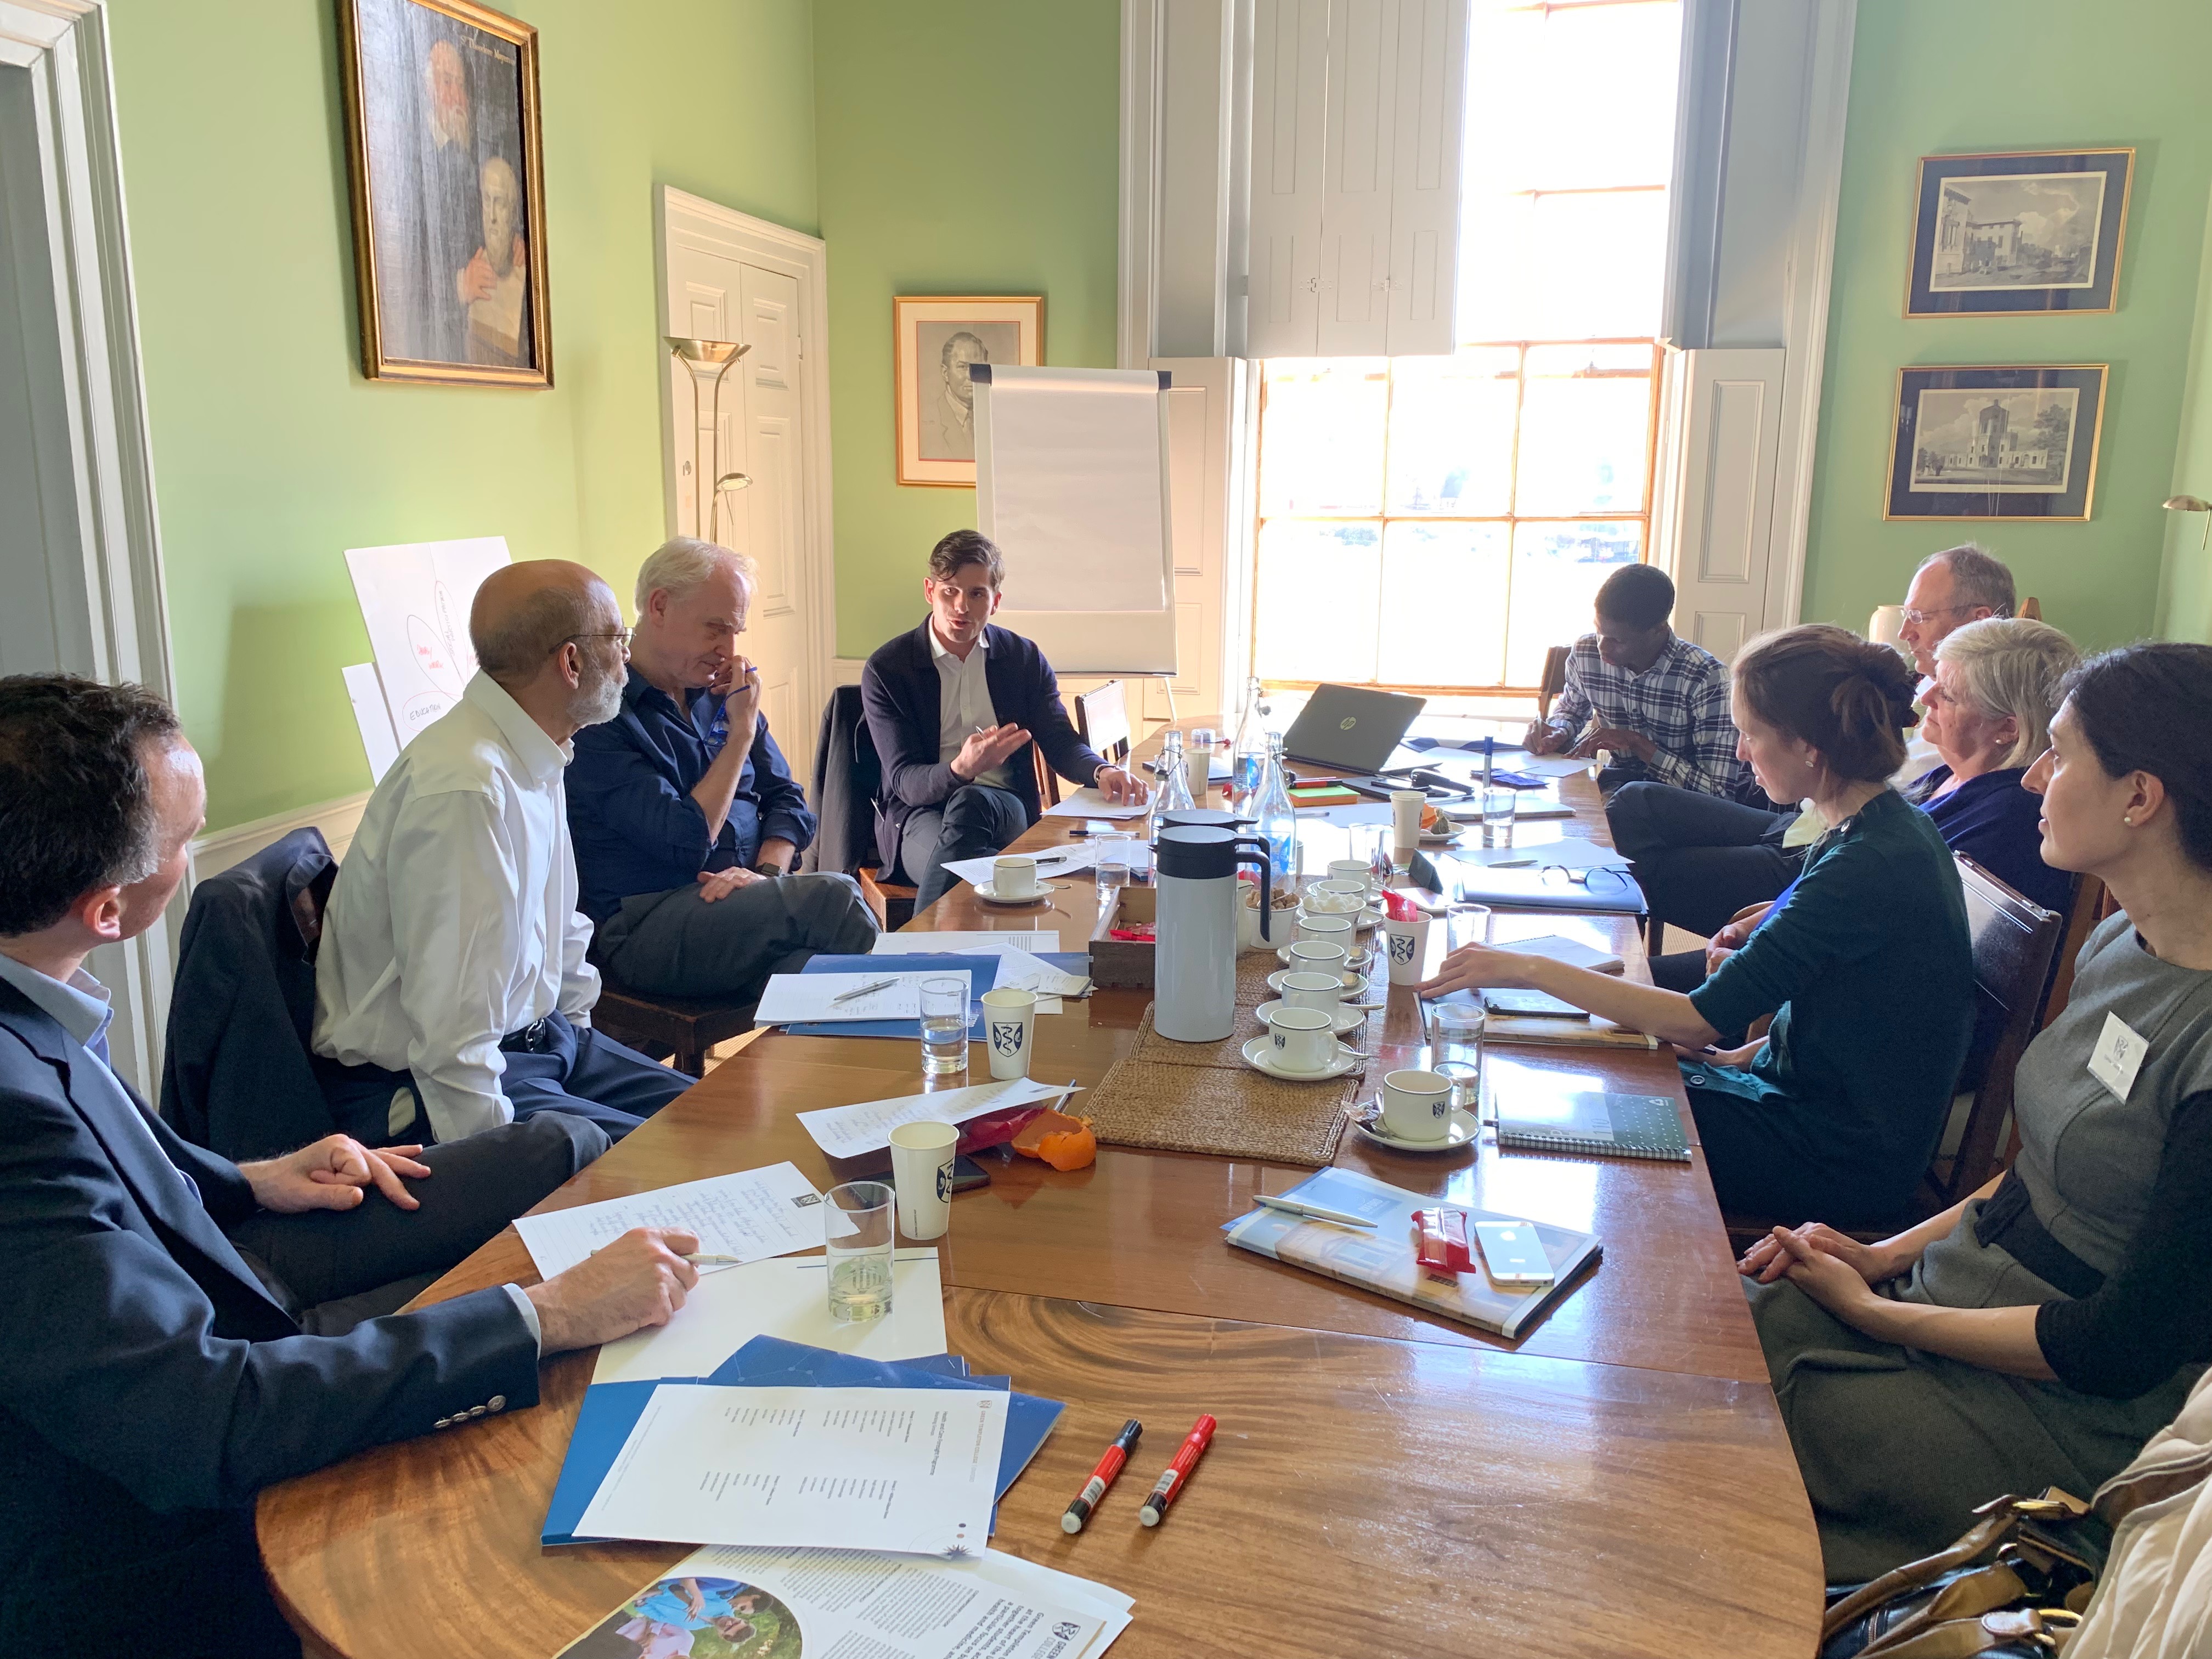 Foresight Pilot Workshop, held at Green Templeton College on 25 March 2019